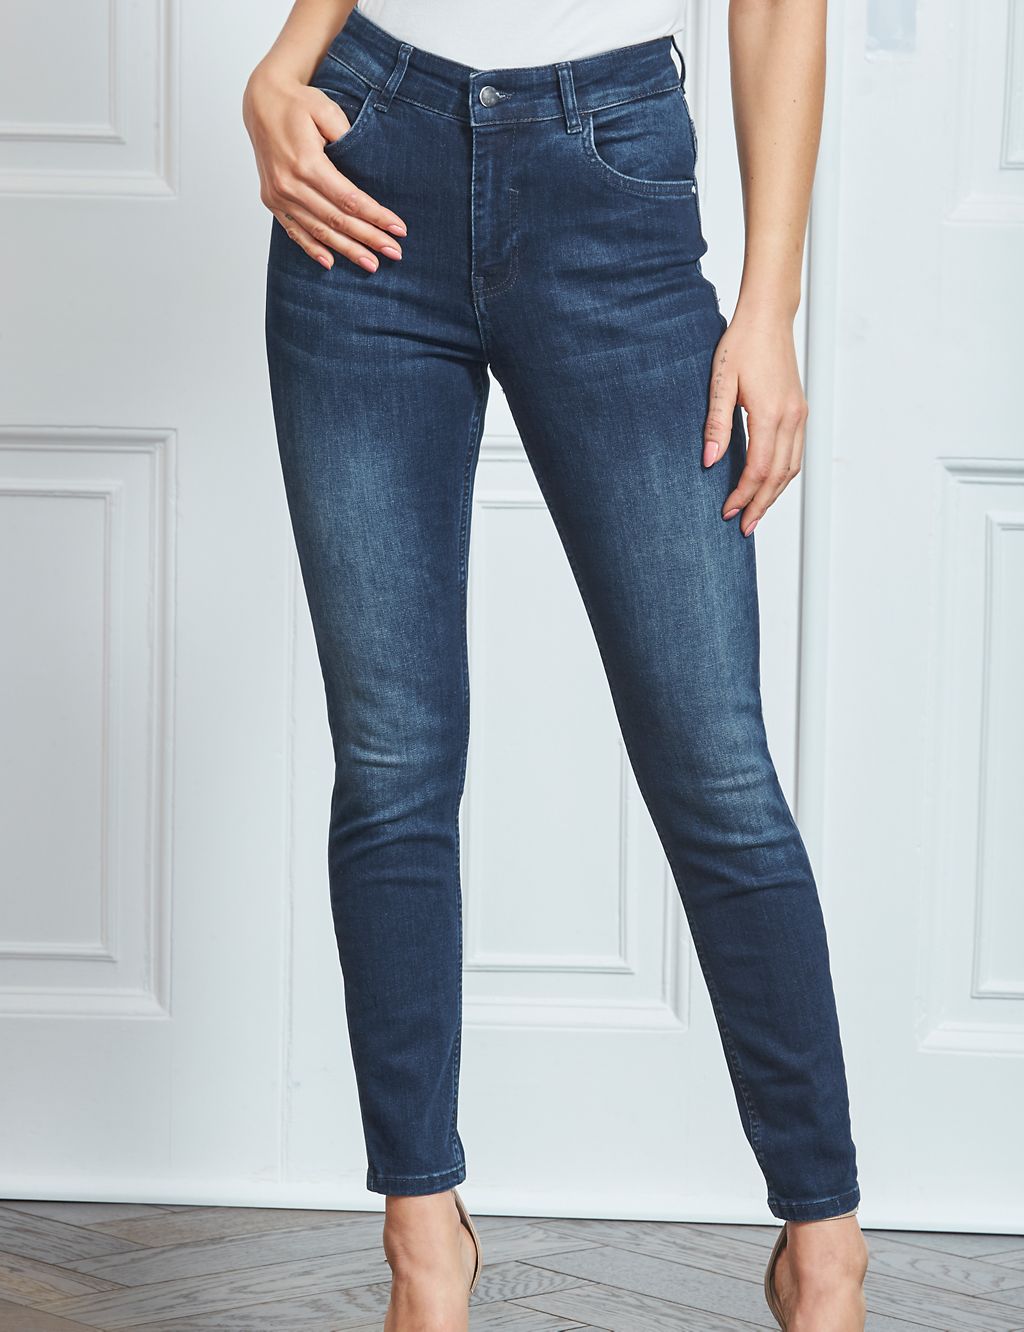 High Waisted Skinny Jeans 1 of 7